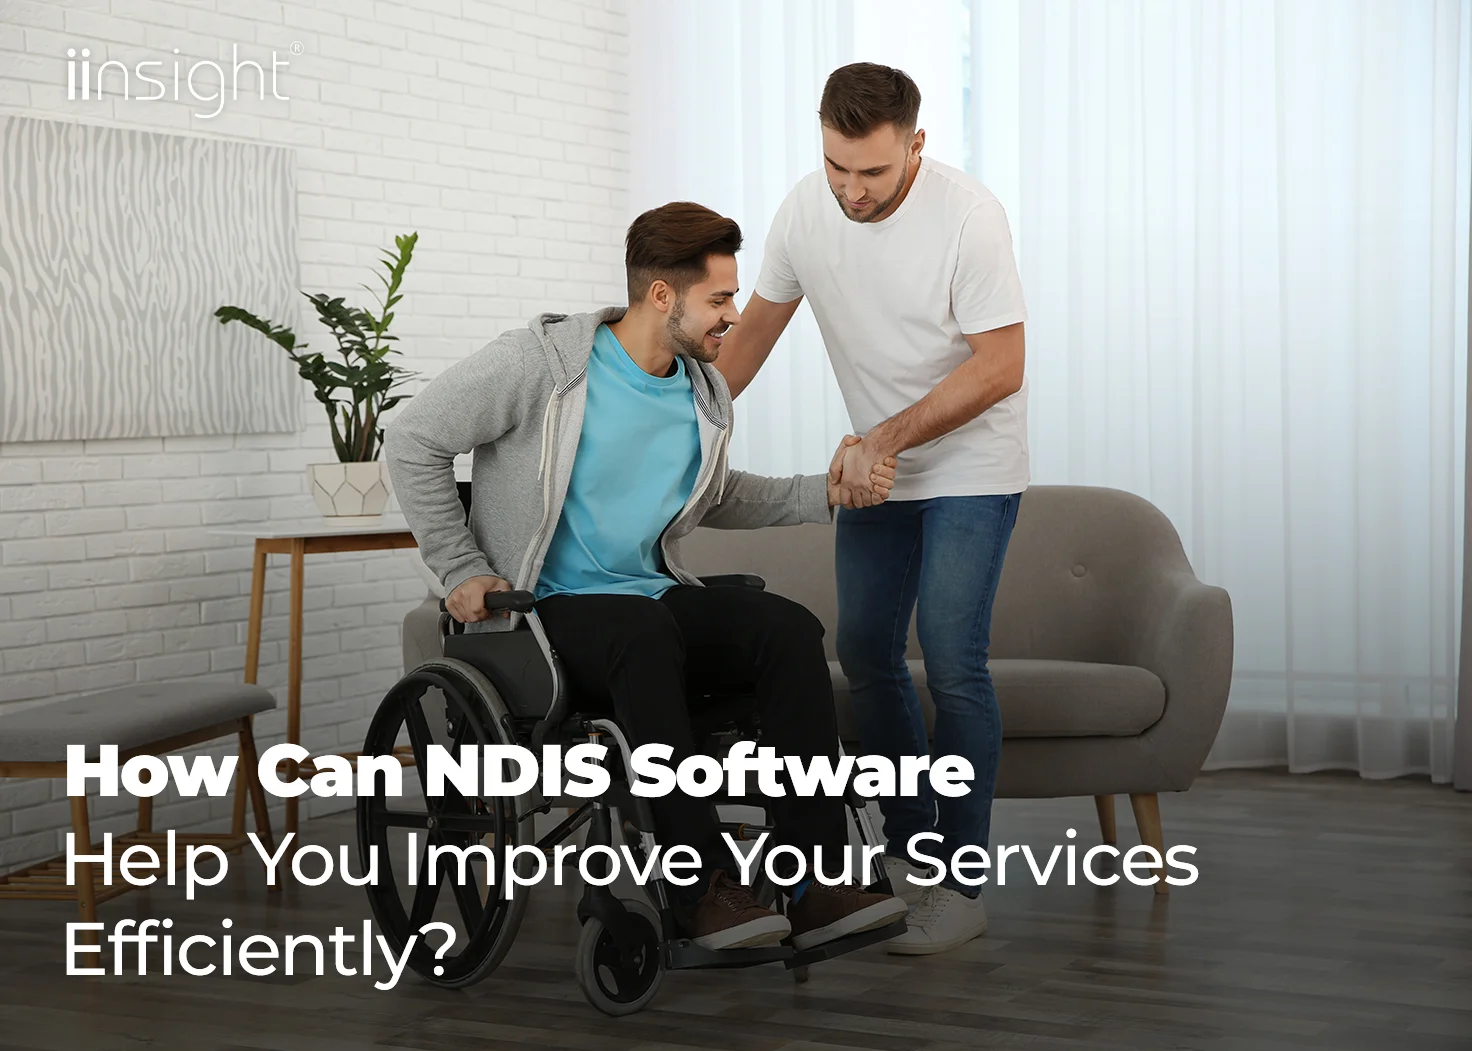 Help You Improve Your Services Efficiently?